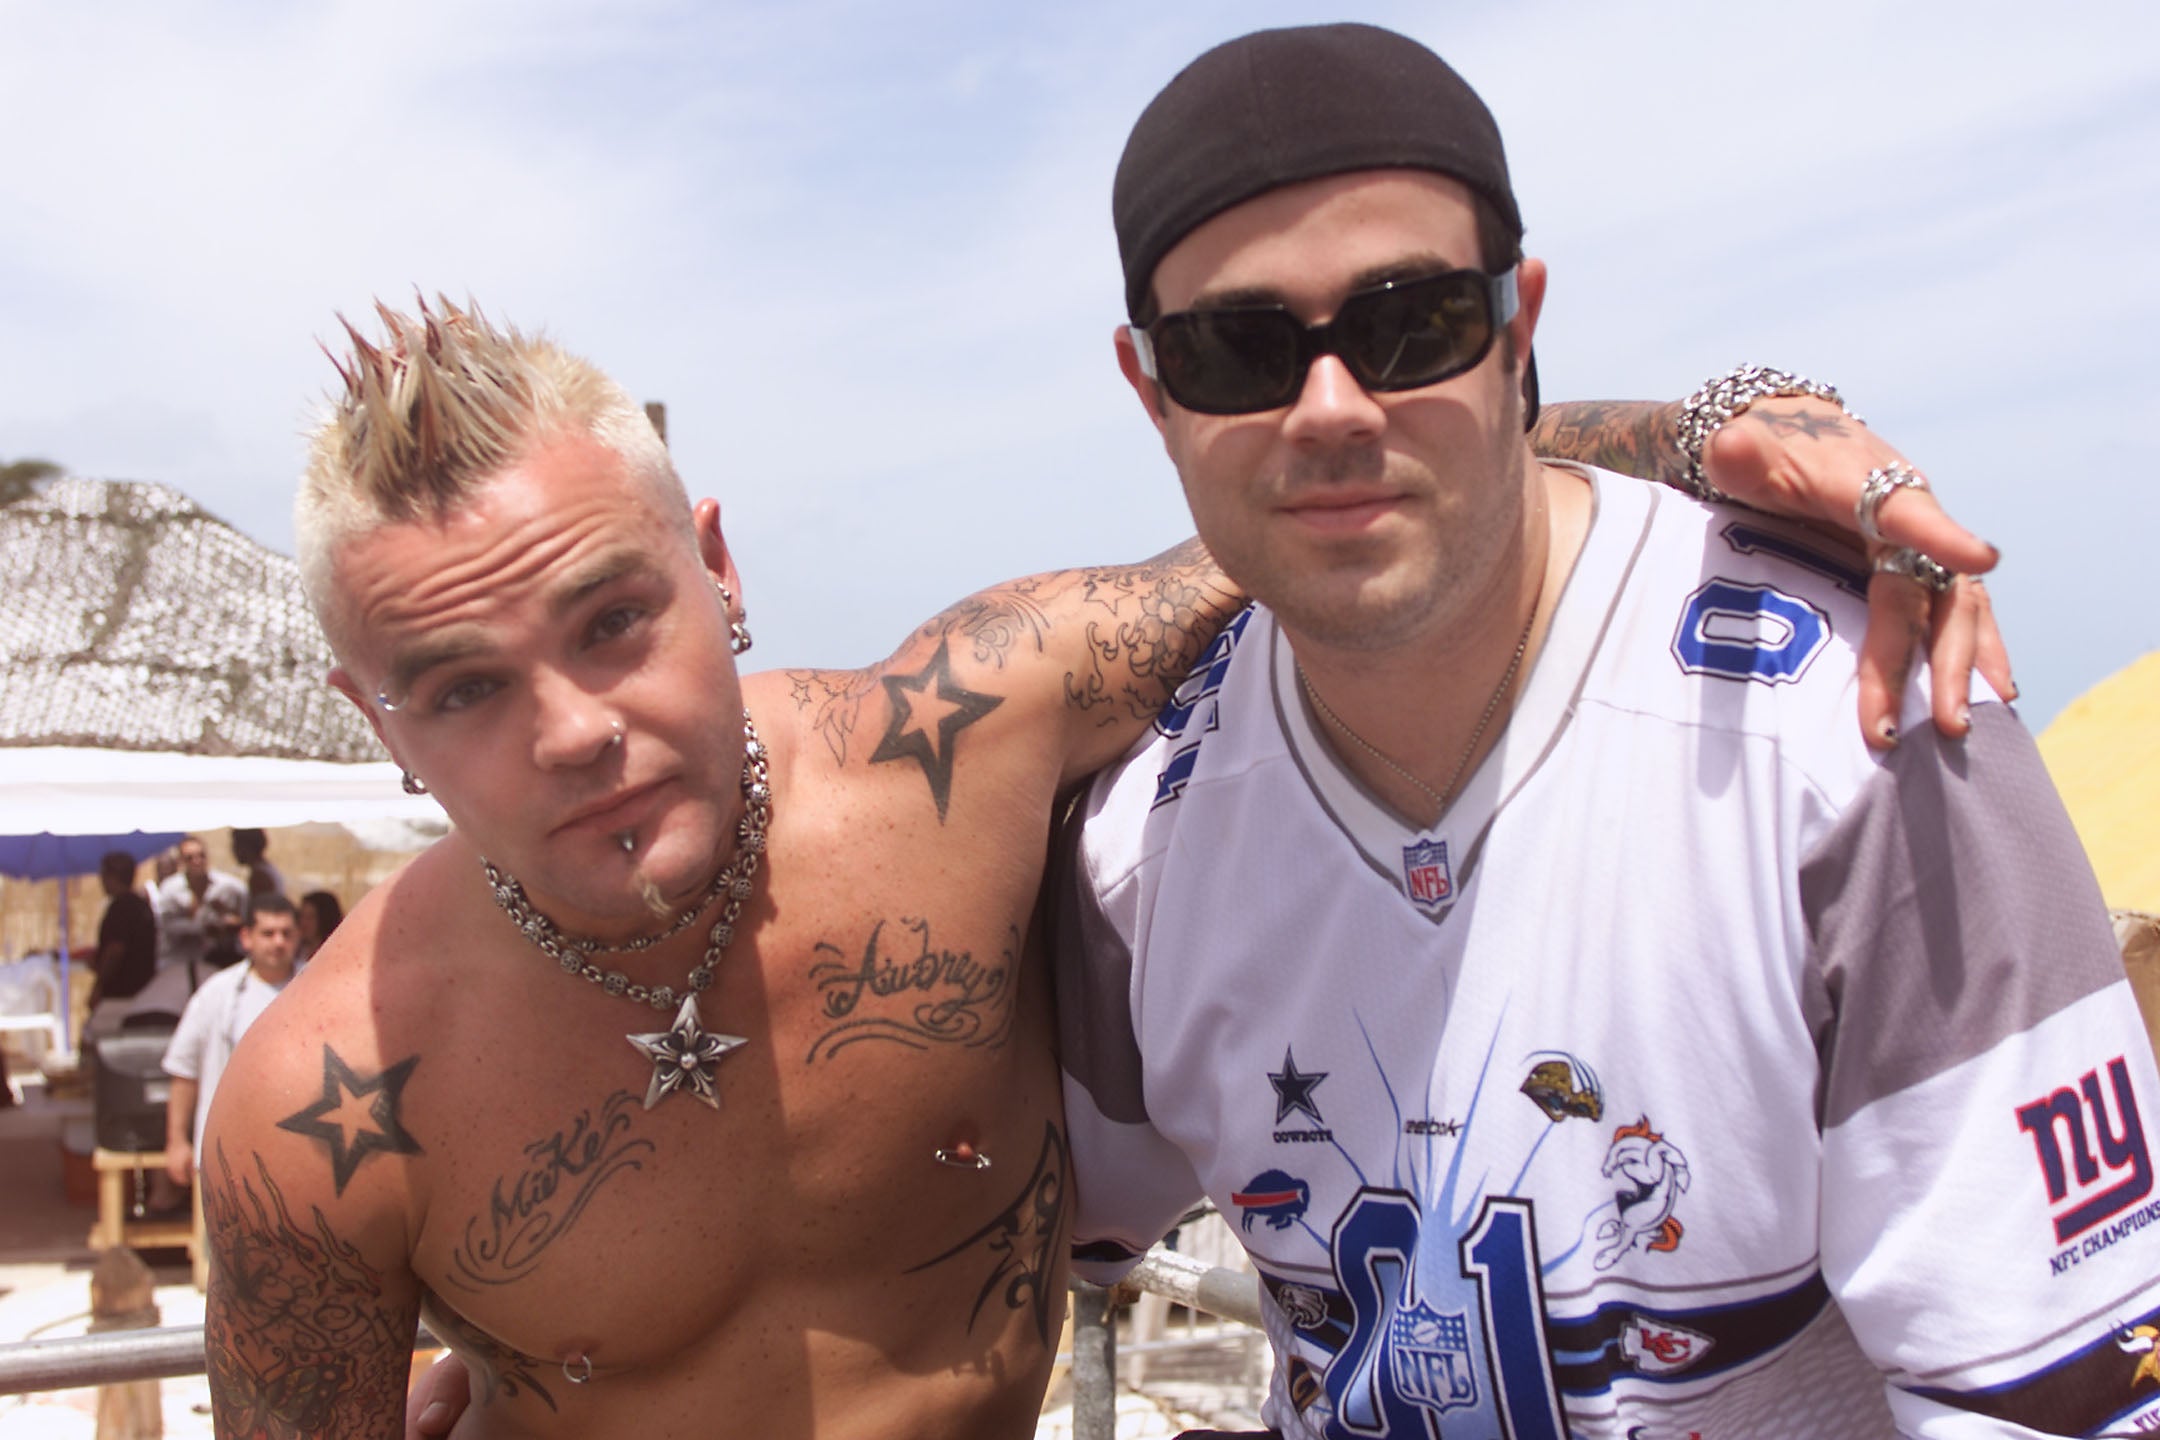 Binzer with TRL host Carson Daly backstage during MTV's Spring Break 2001